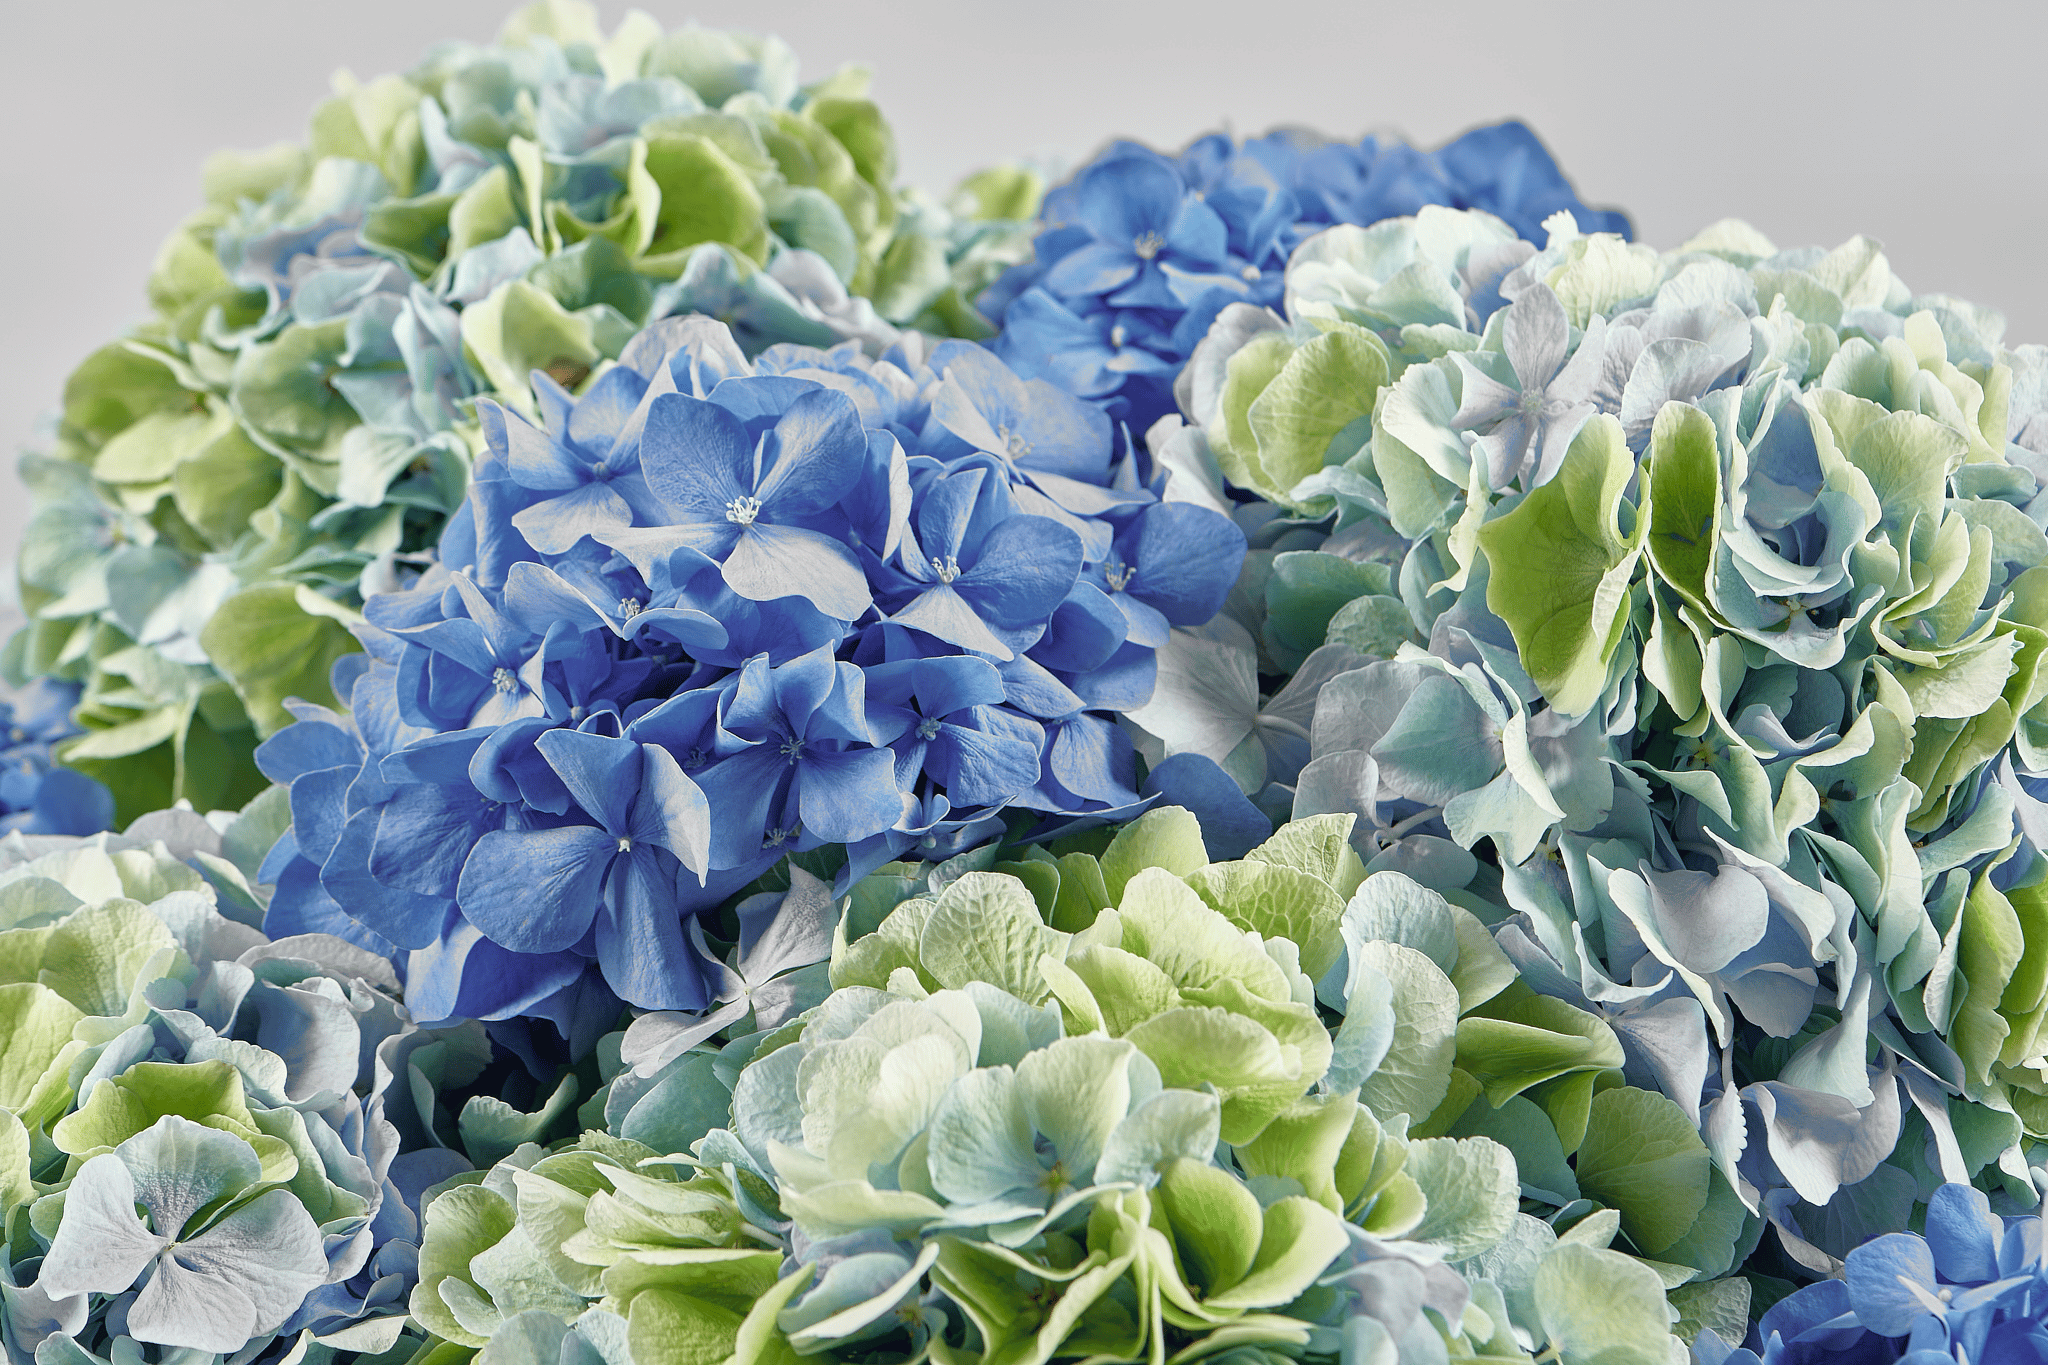 Tips and tricks to grow a stunning Hydrangea!